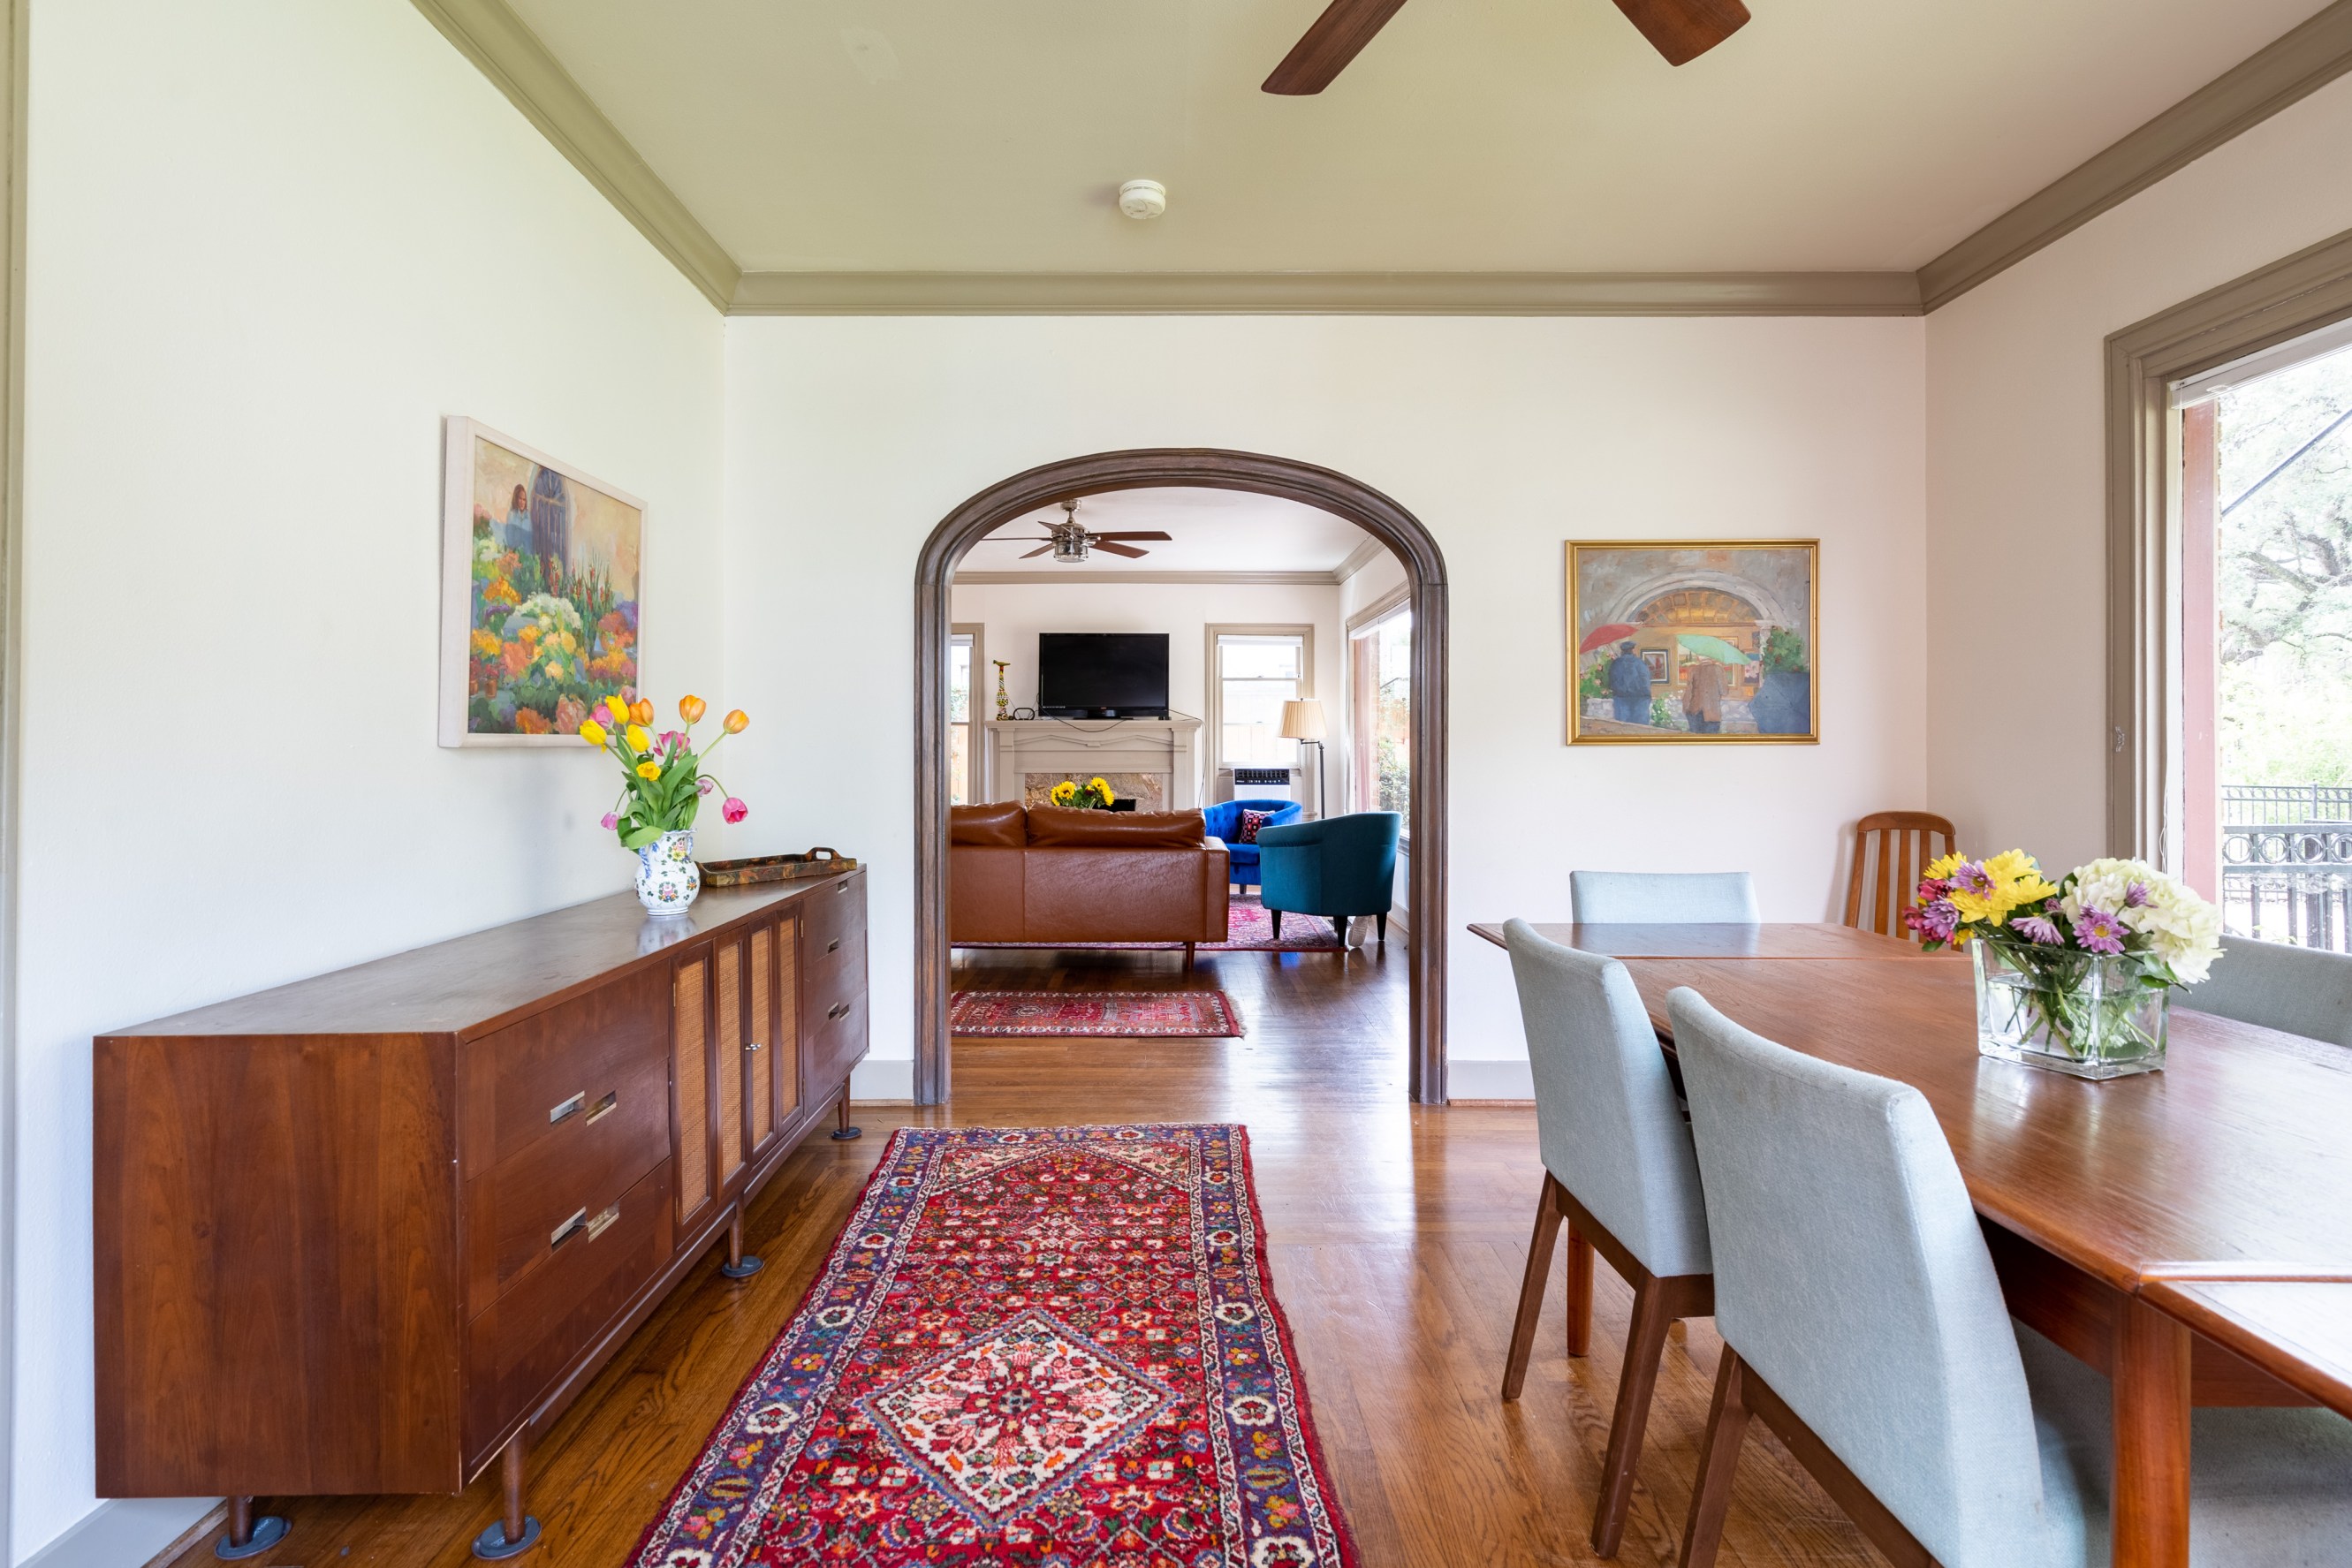 A bright and open dining room with a wooden antique credenza, an imperial runner carpet and a dining table with seating on the right.